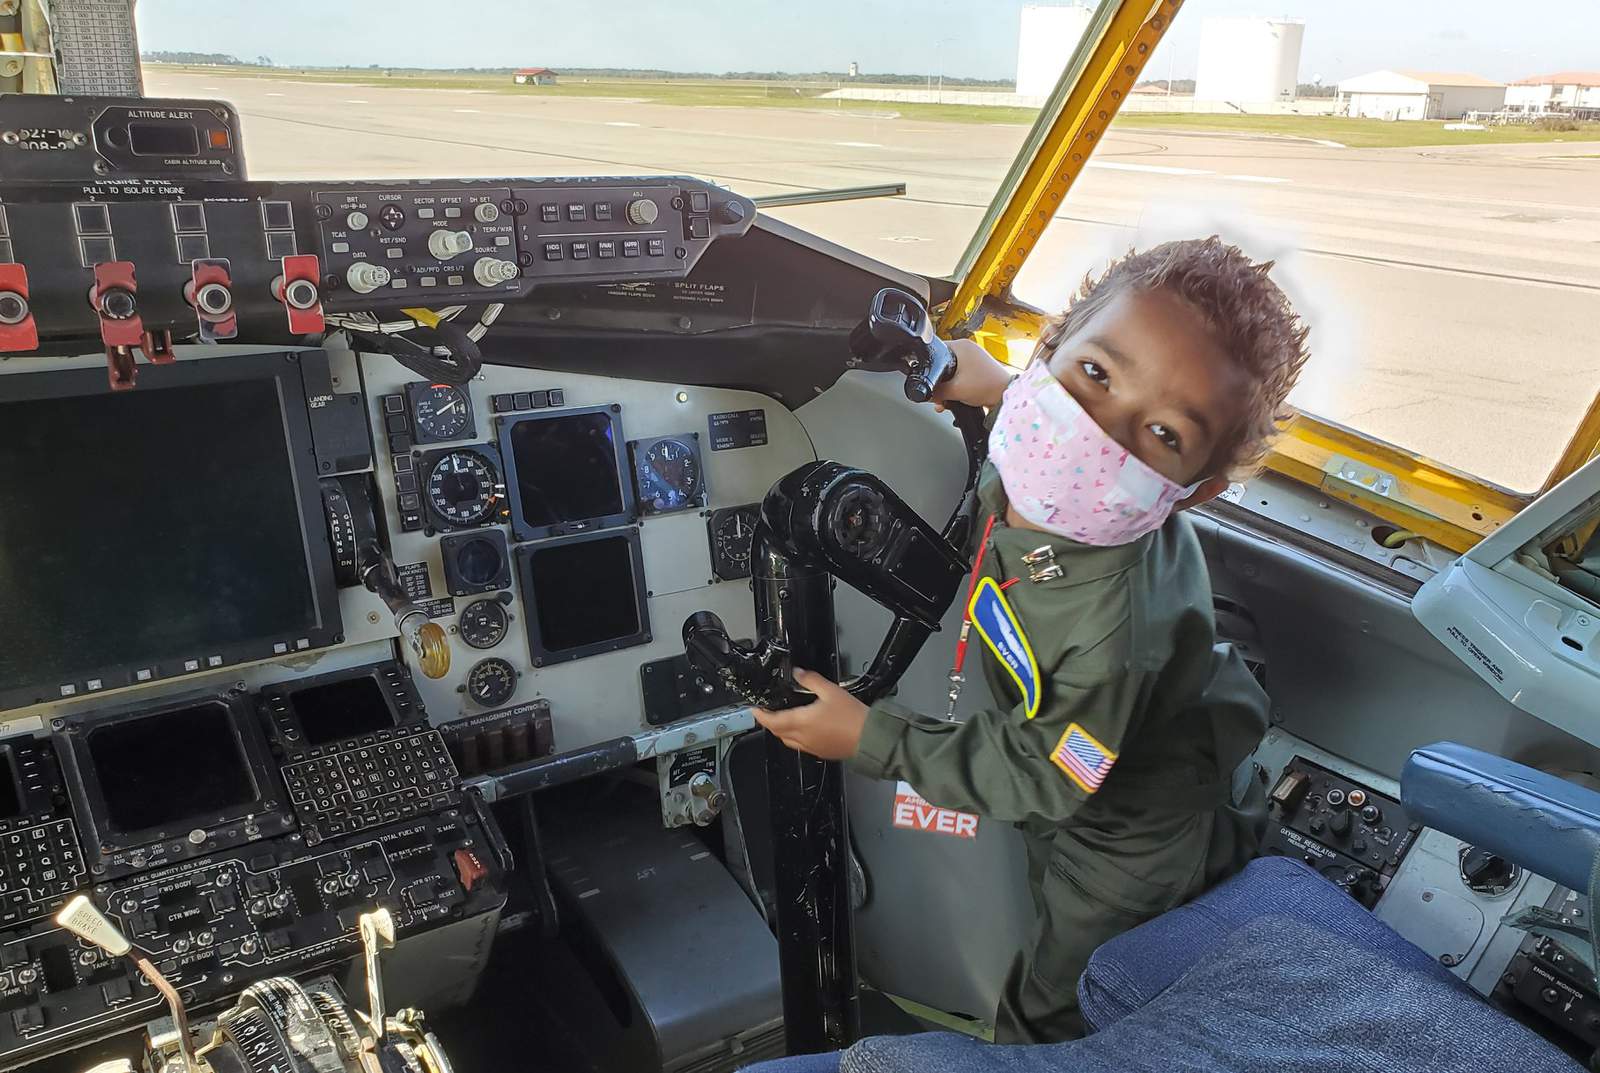 PHOTOS: 5-year-old battling cancer becomes pilot for a day at MacDill Air Force Base